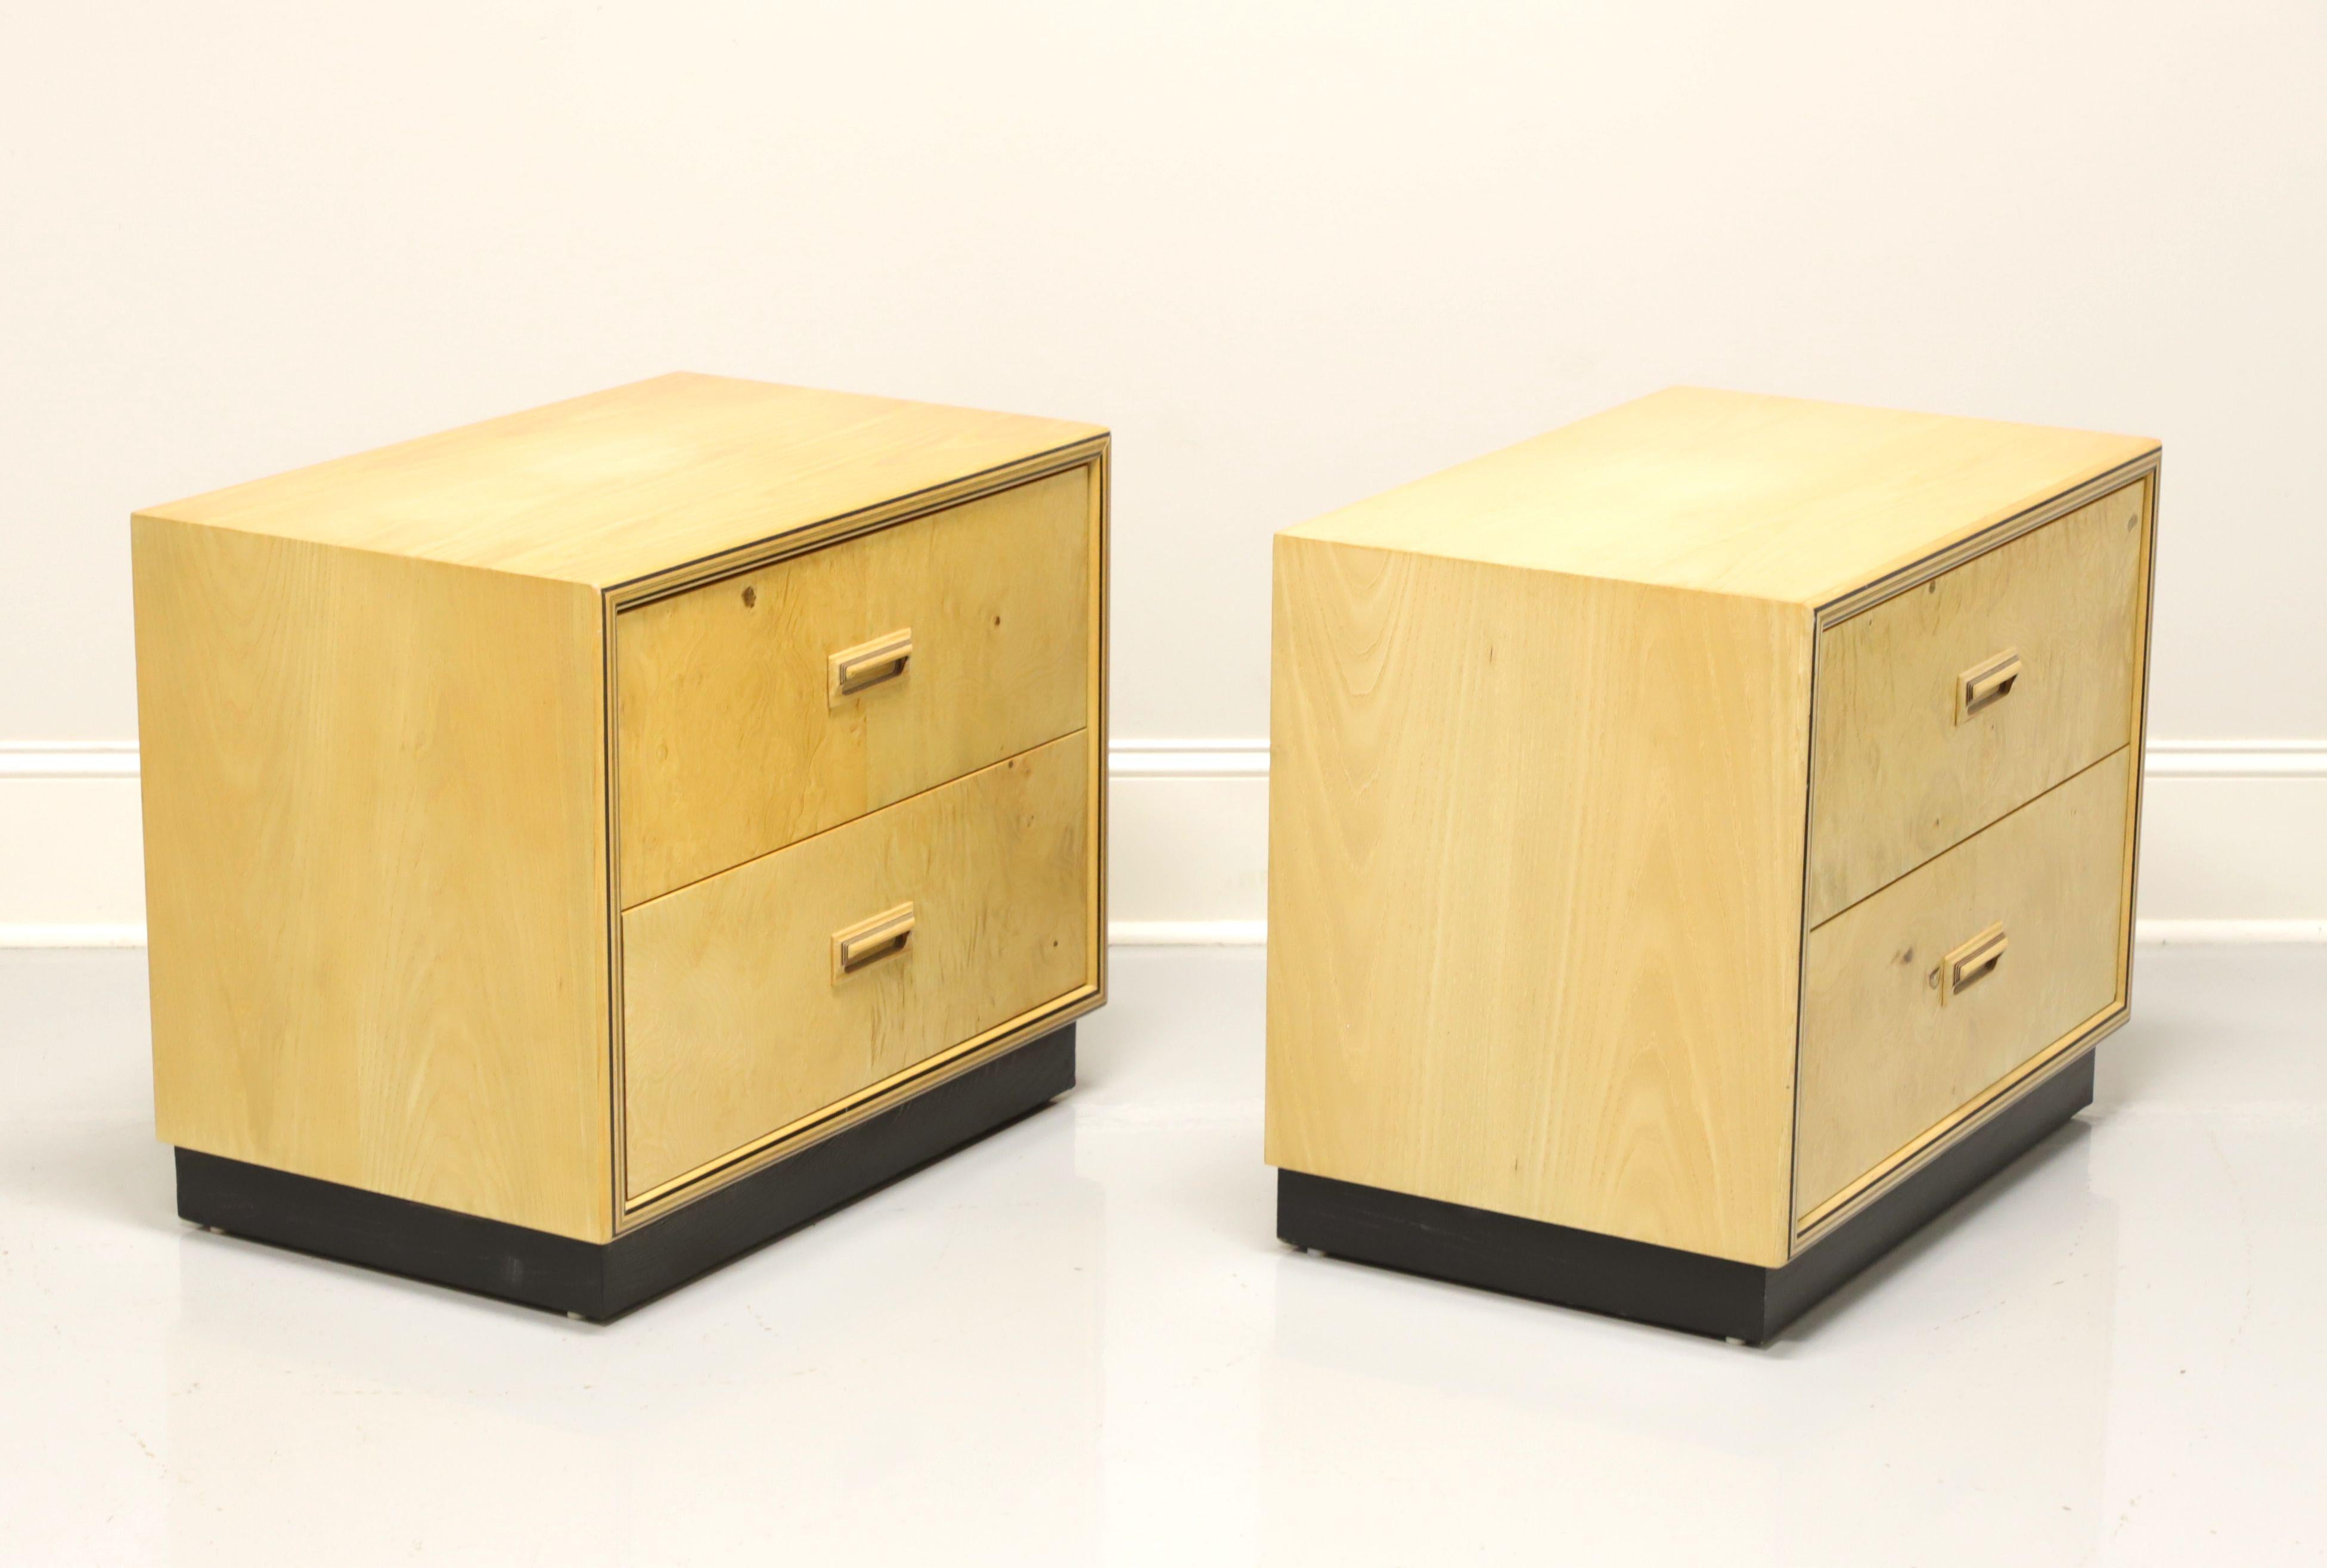 A pair of Art Deco style nightstands by Henredon, from their Scene Two Collection. Olive wood burl with decorative wood handles. Features two drawers of dovetail construction. Made in North Carolina, USA, circa 1980's.

Style #: 9601-06

Measures: